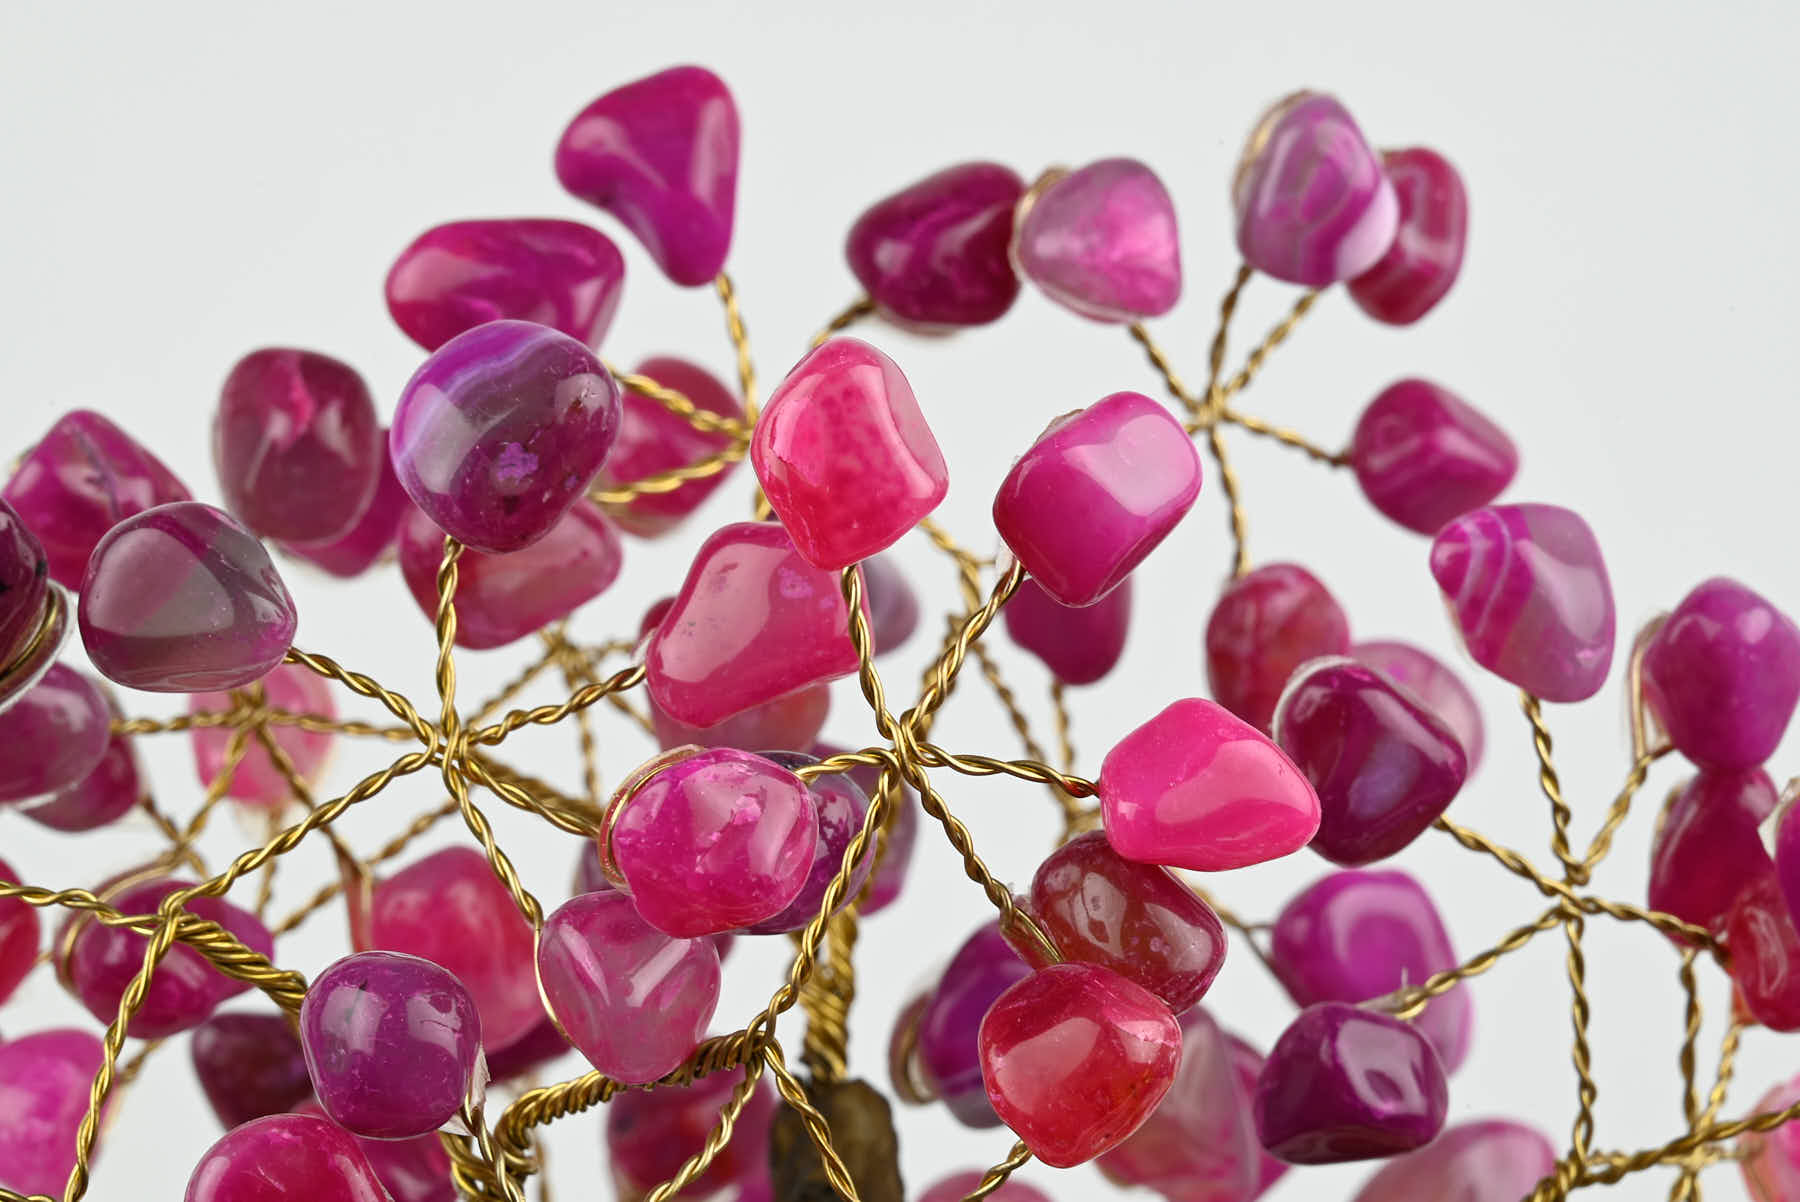 50cm Tall Gemstone Tree with Amethyst base and 240 Pink Agate gems - #TRPINK-43002